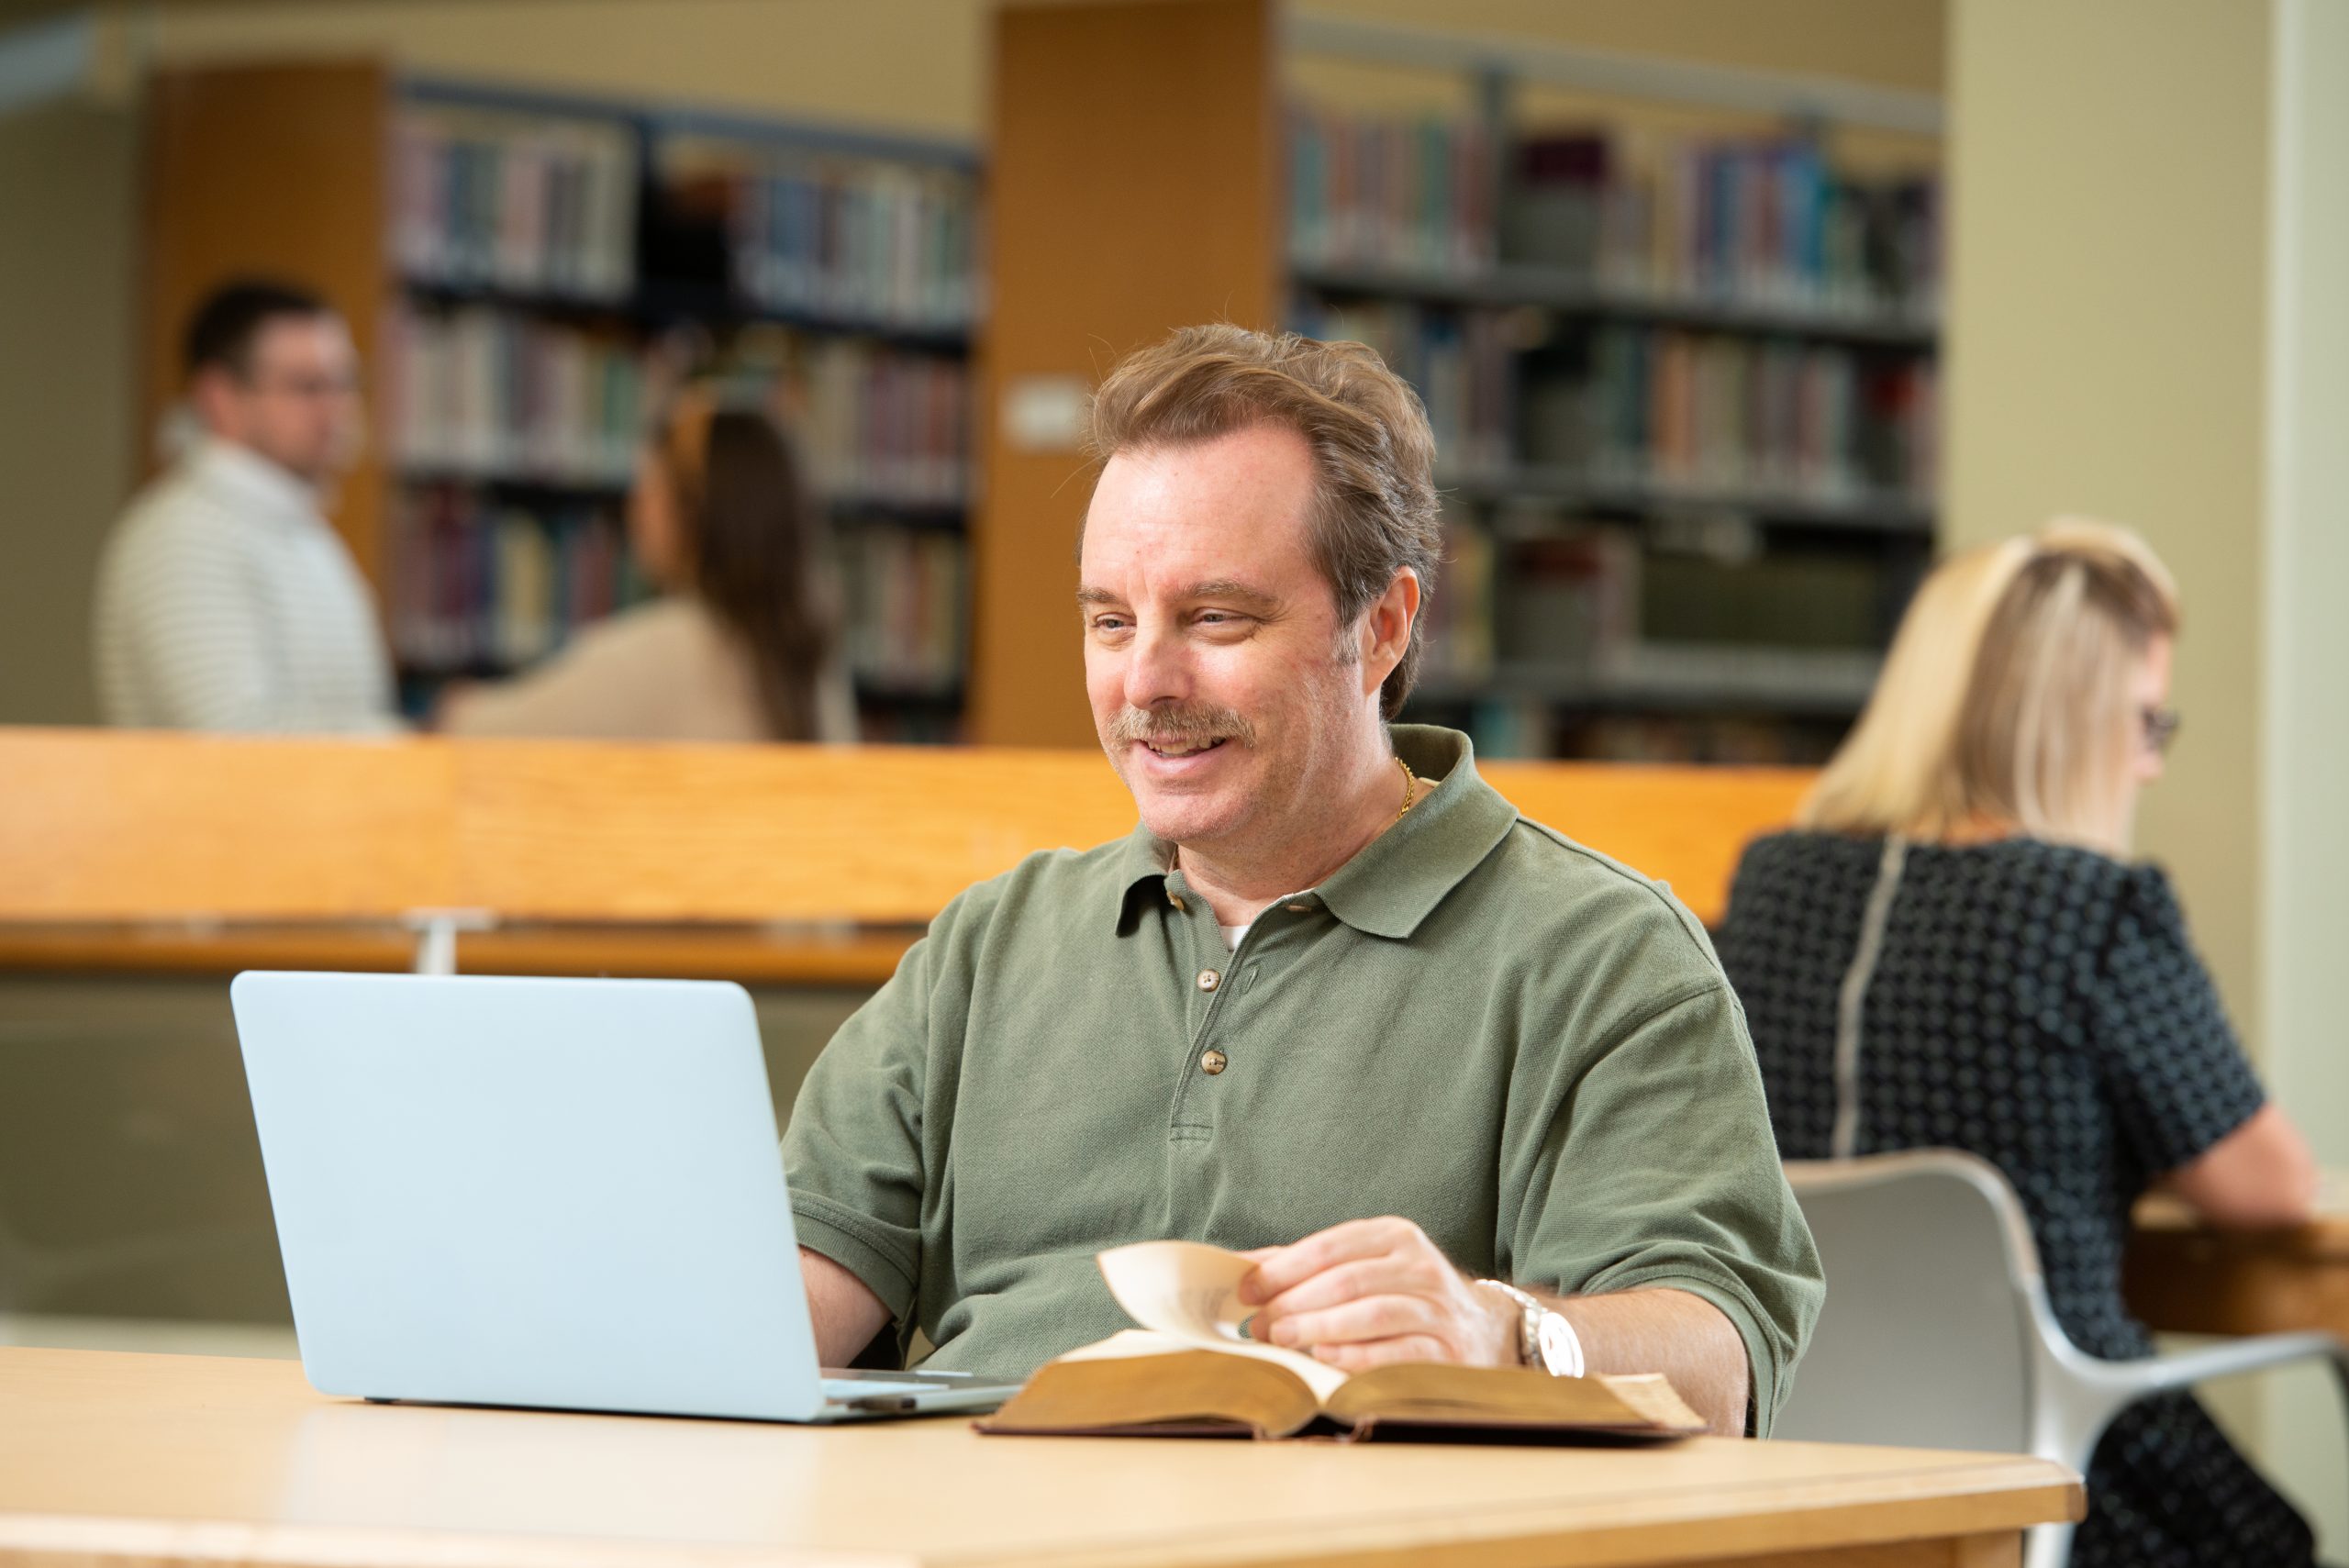 man in library using a laptop